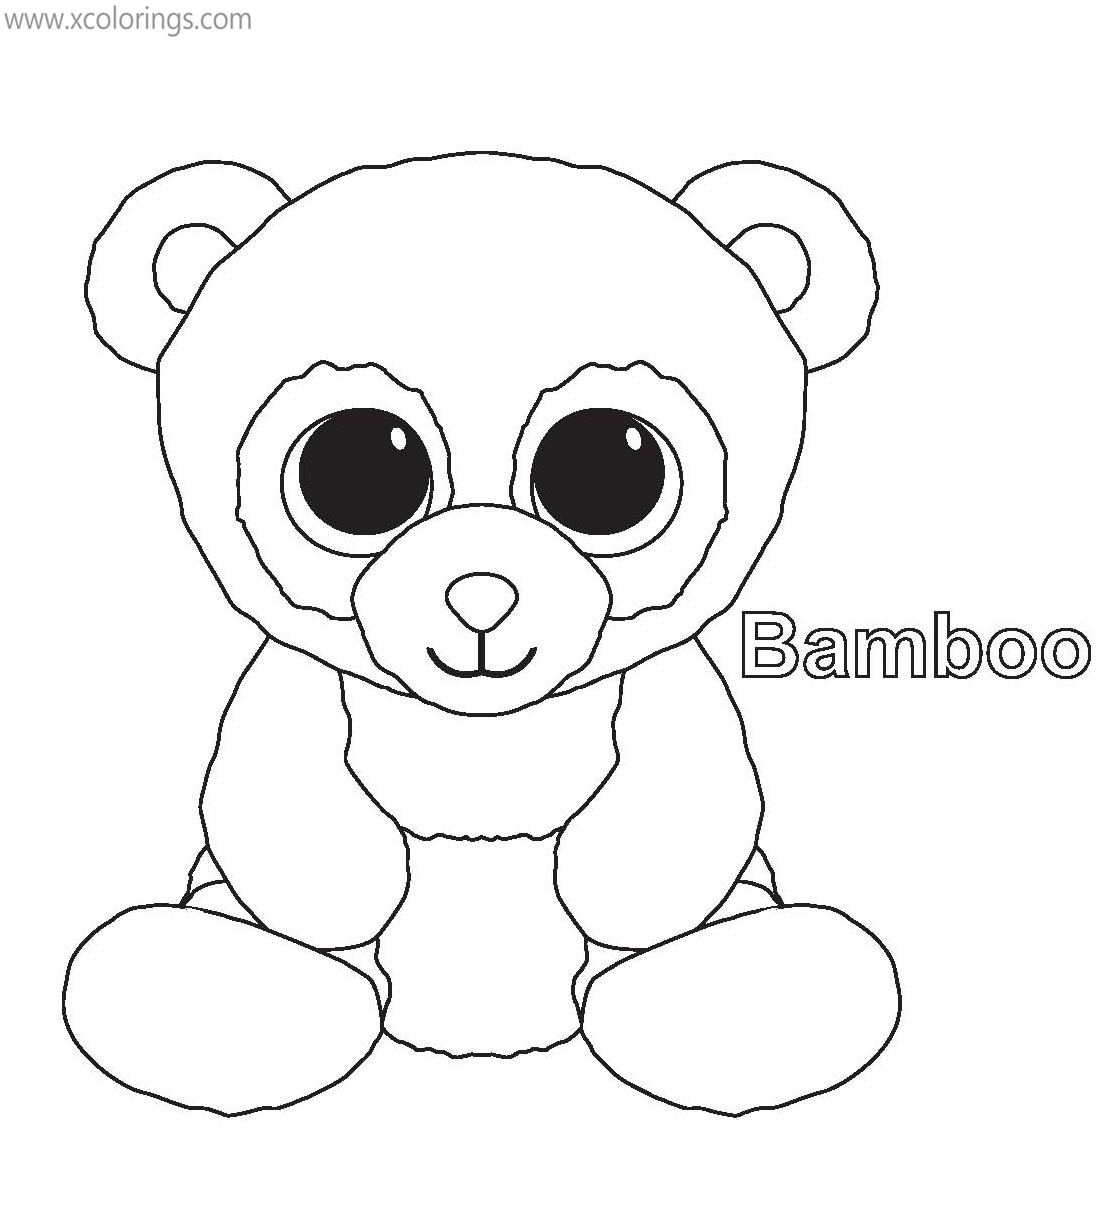 Free Beanie Boos Coloring Pages Panda Bamboo printable